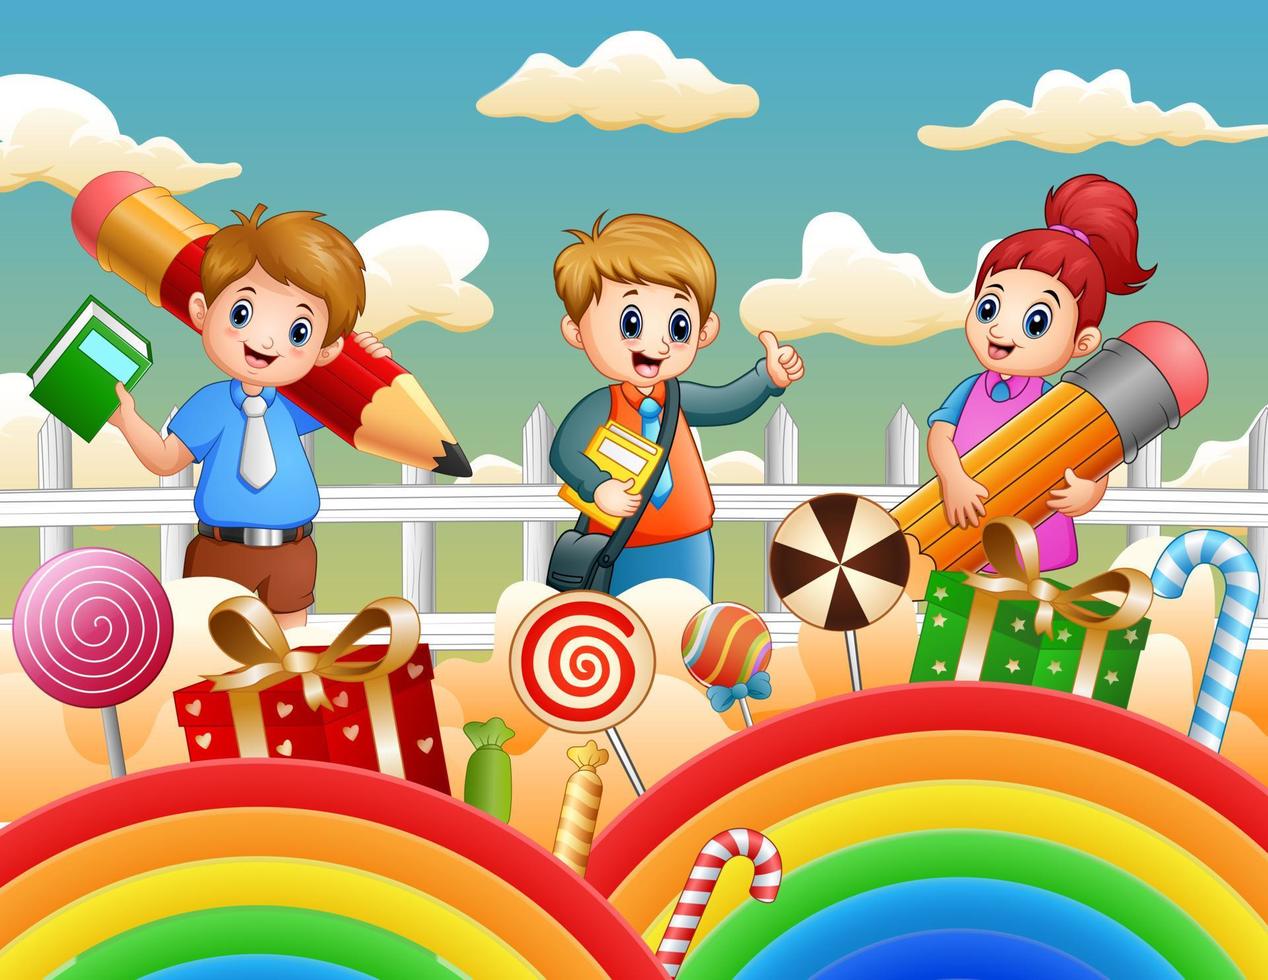 Children in fantasy land with candy illustration vector